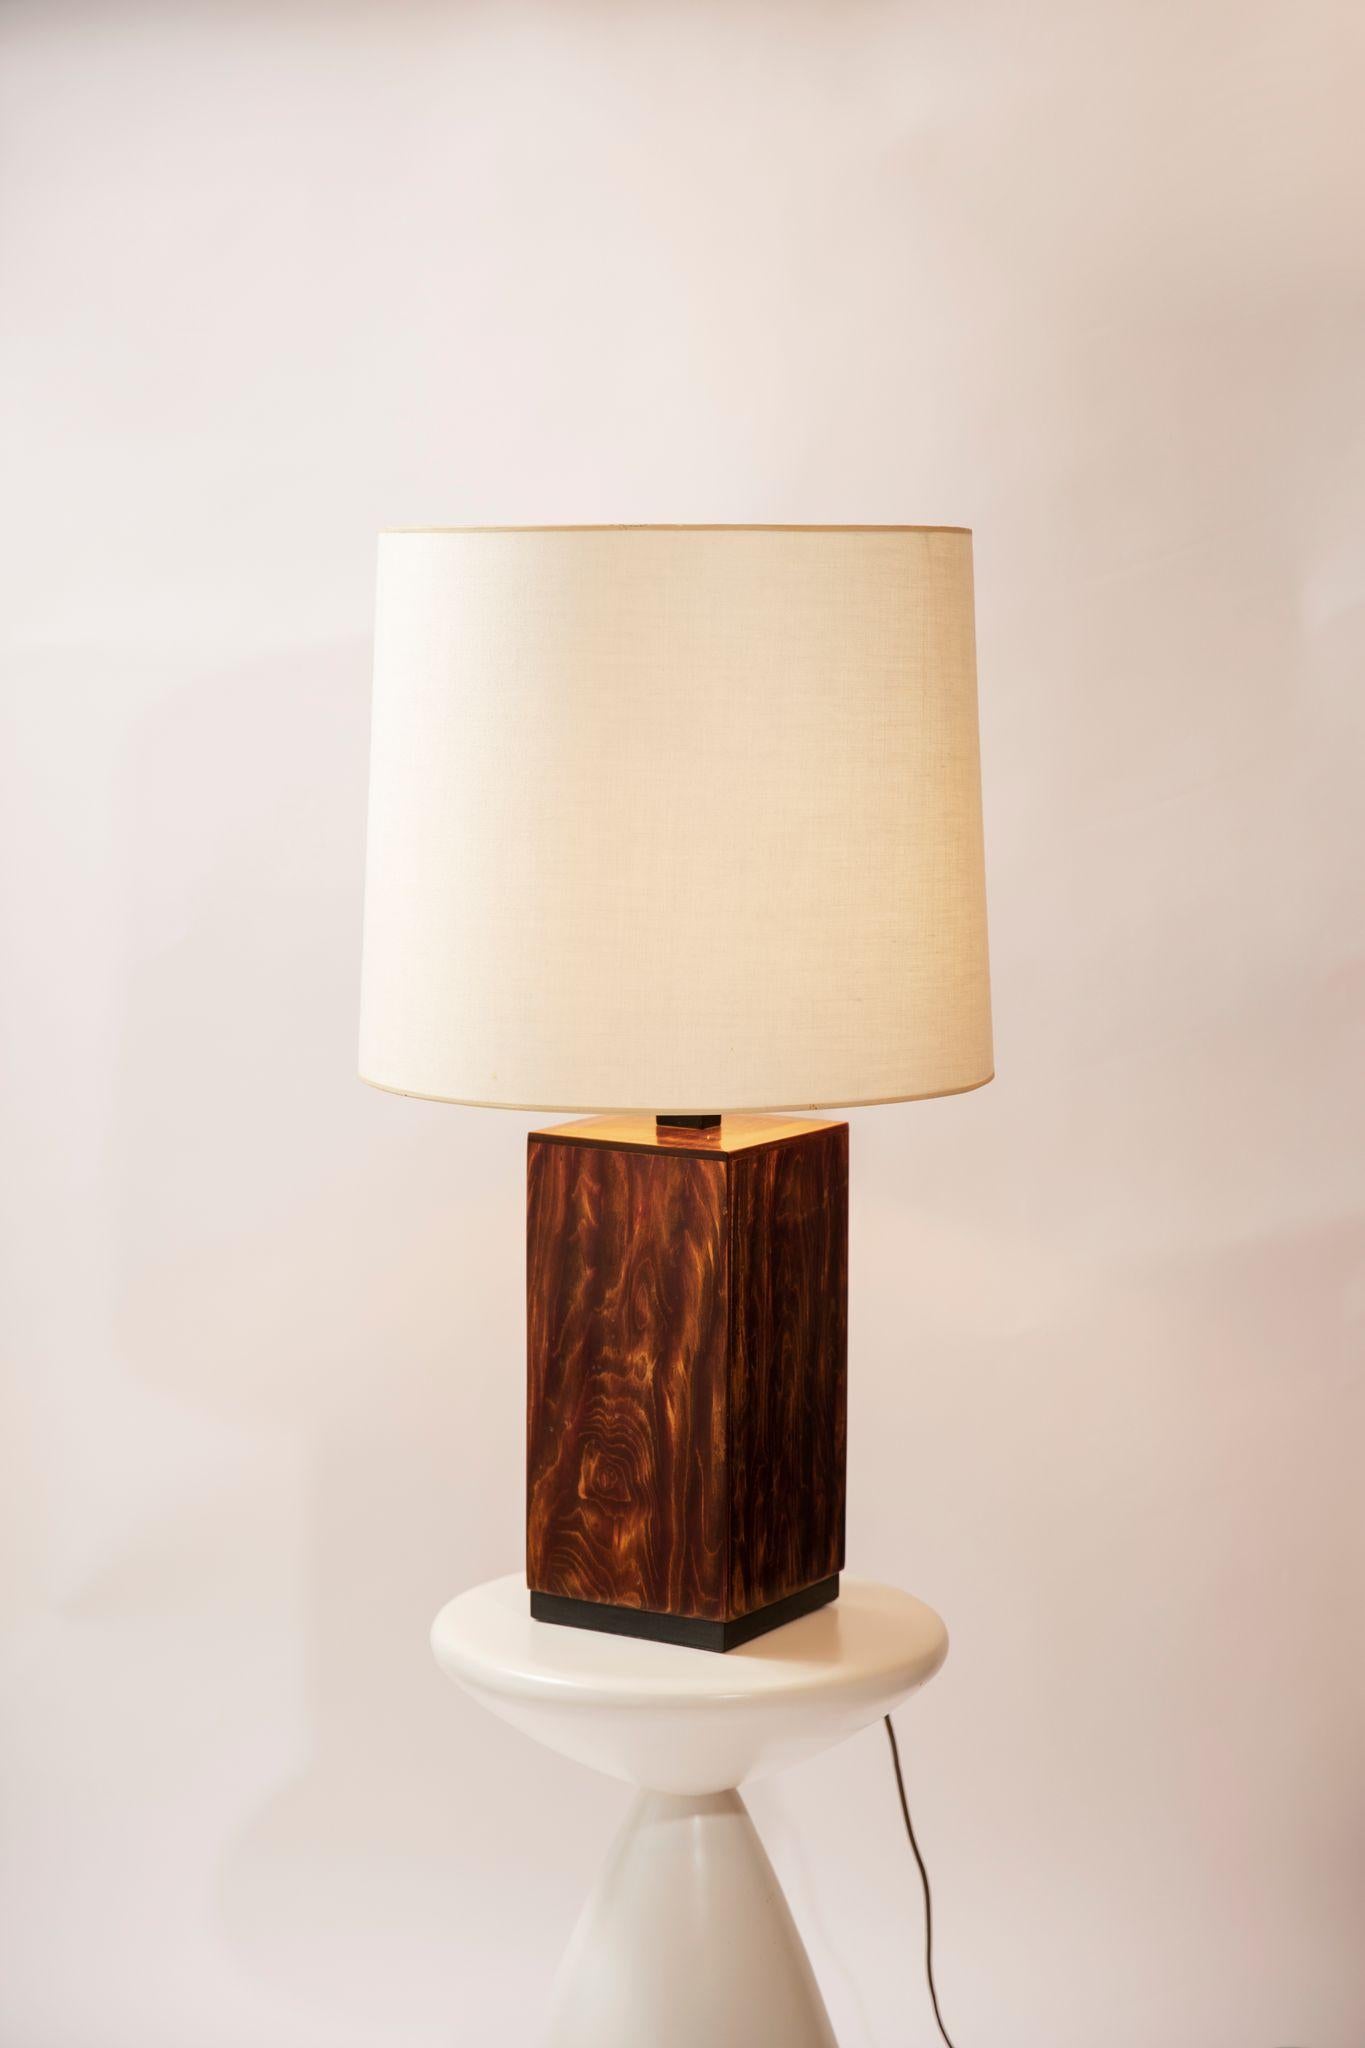 Rare exotic wood lamp with custom linen shade. Chic and understated.

The dimensions listed are the overall dimensions of the lamp with the shade: 17 in. diameter x 30 in. tall (overall).